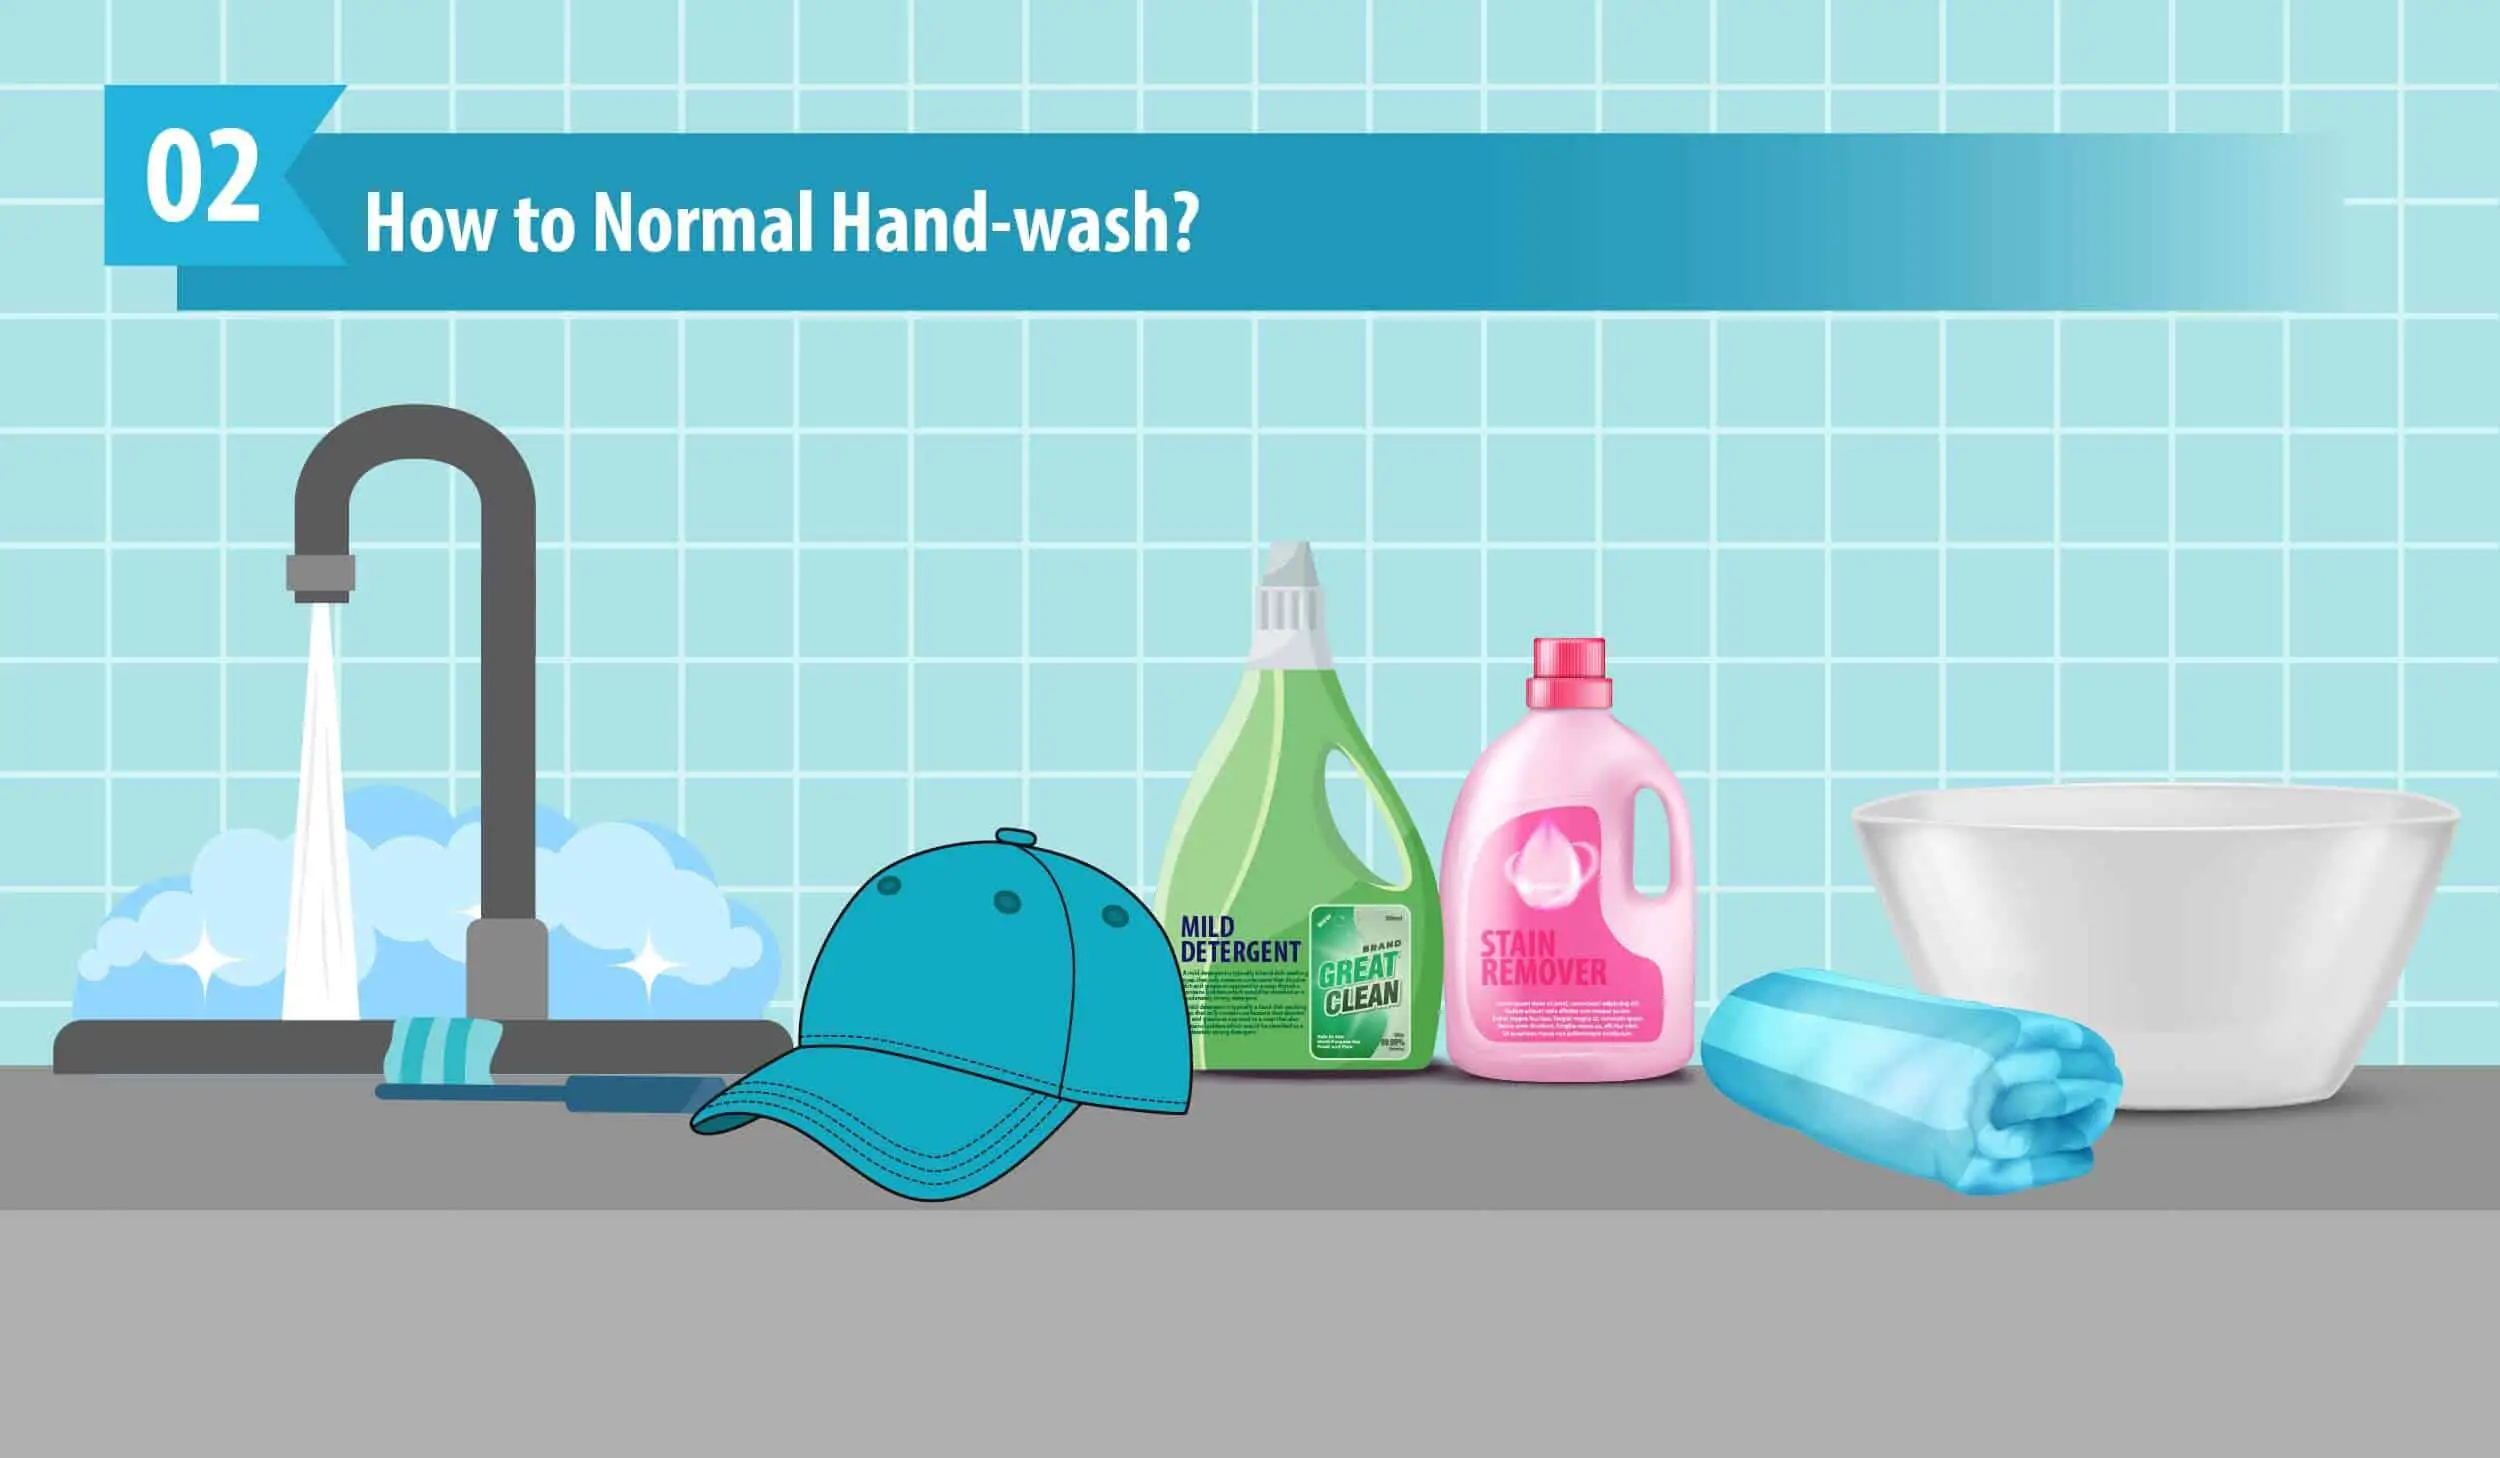 How to Normal Hand-wash